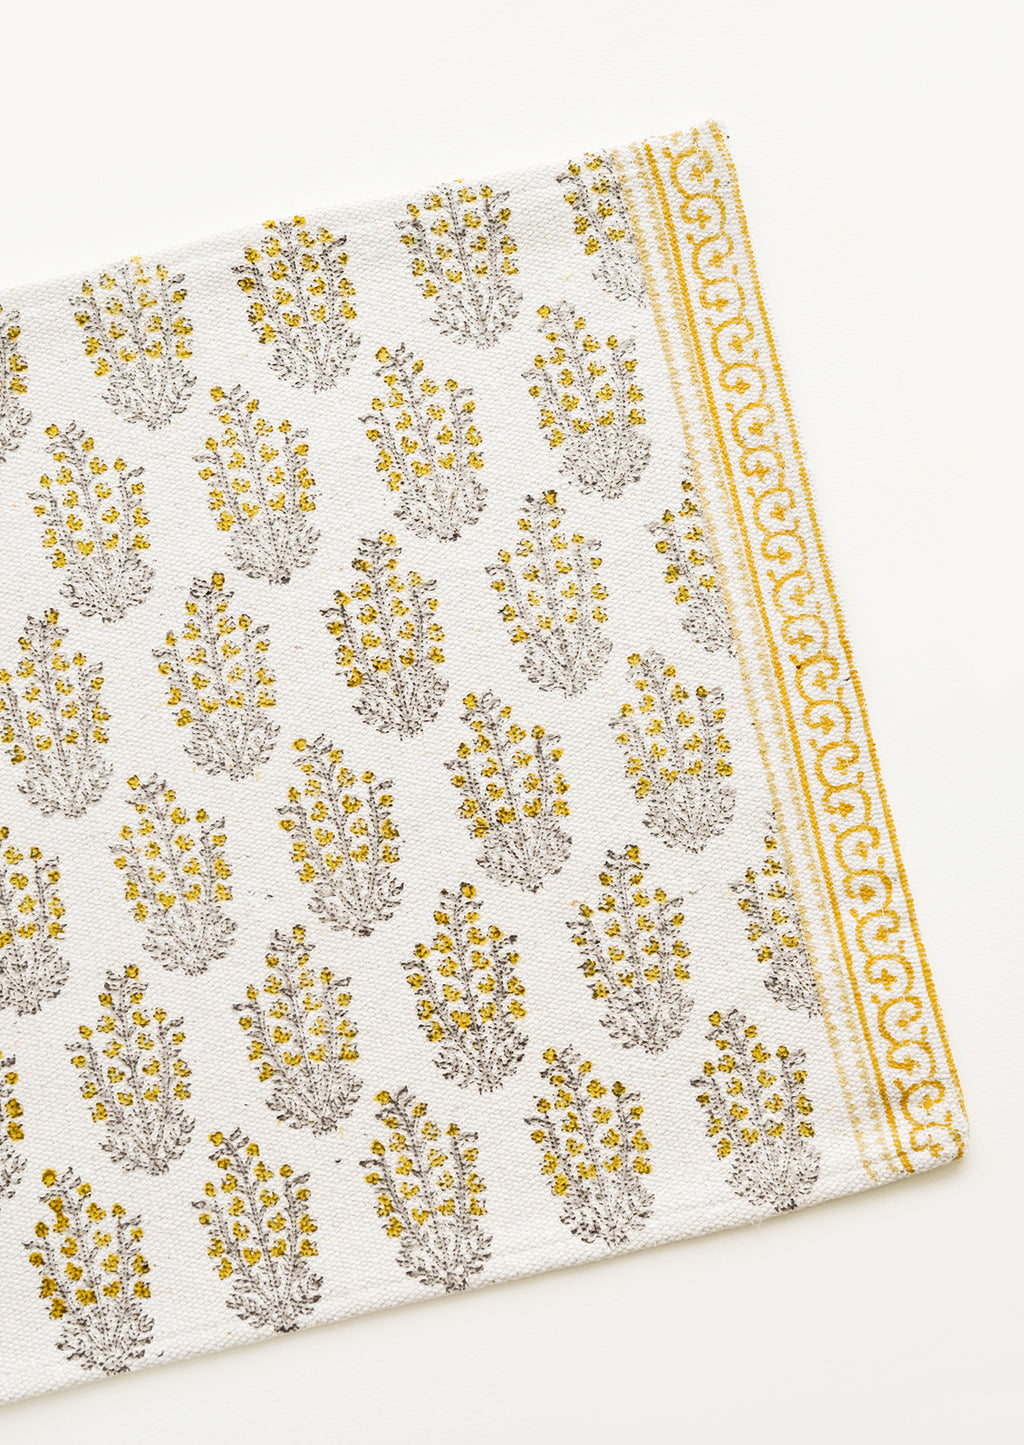 1: An ivory rectangular cotton placemat with yellow floral pattern.